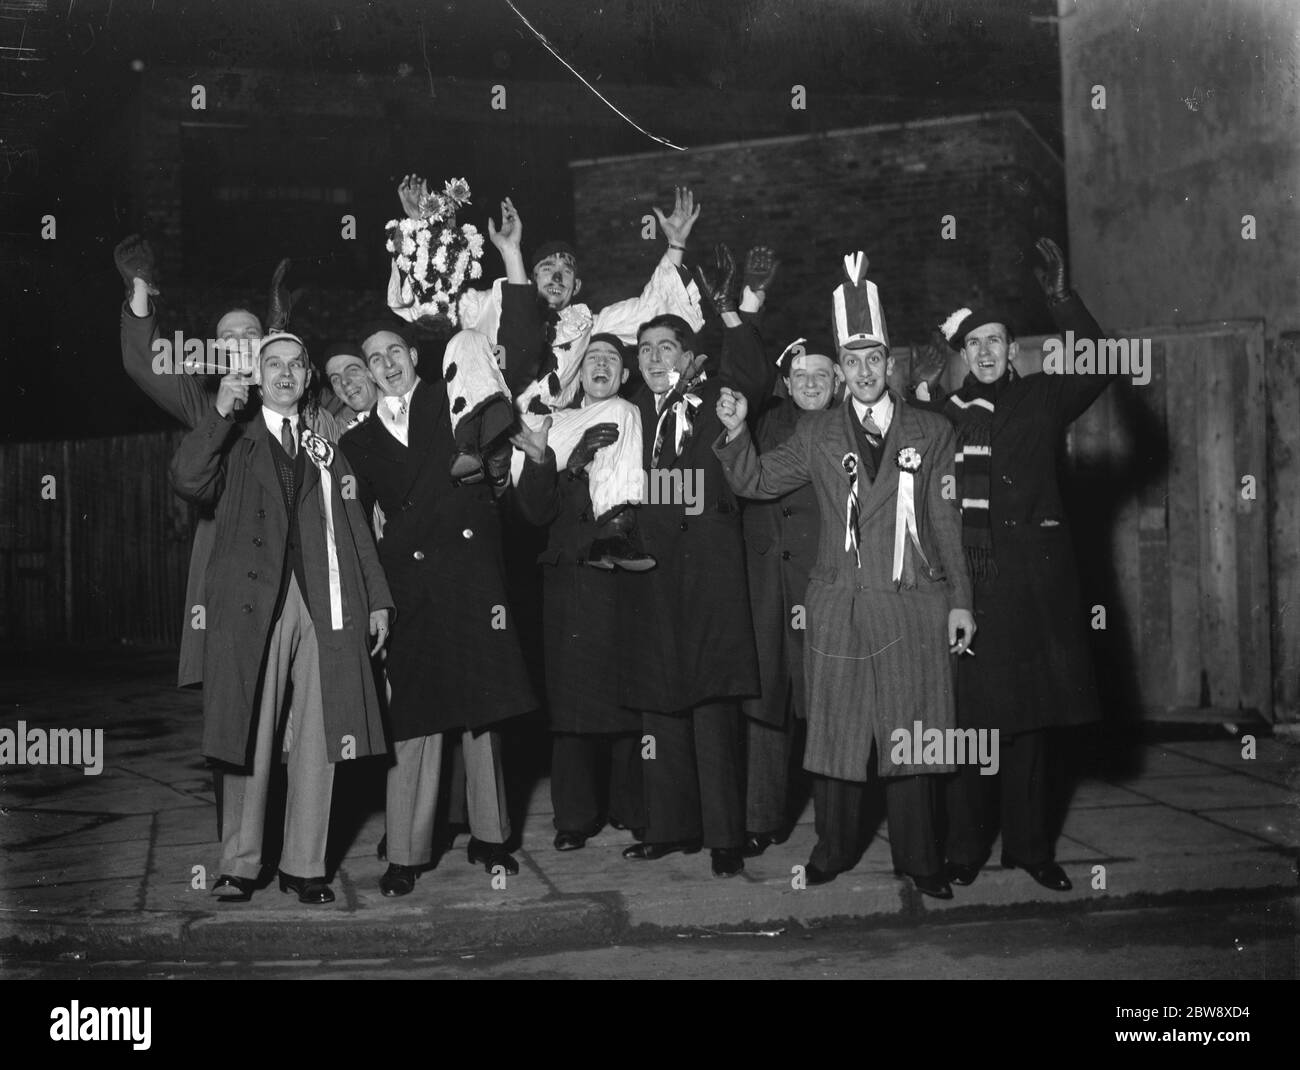 Dartford supporters - FA Cup - Dartford's supporters leave at midnight to travel to Shildon for their FA Cup tie - 12/12/36 Charabanc party ready to go and support Dartford football club . 1936 Stock Photo